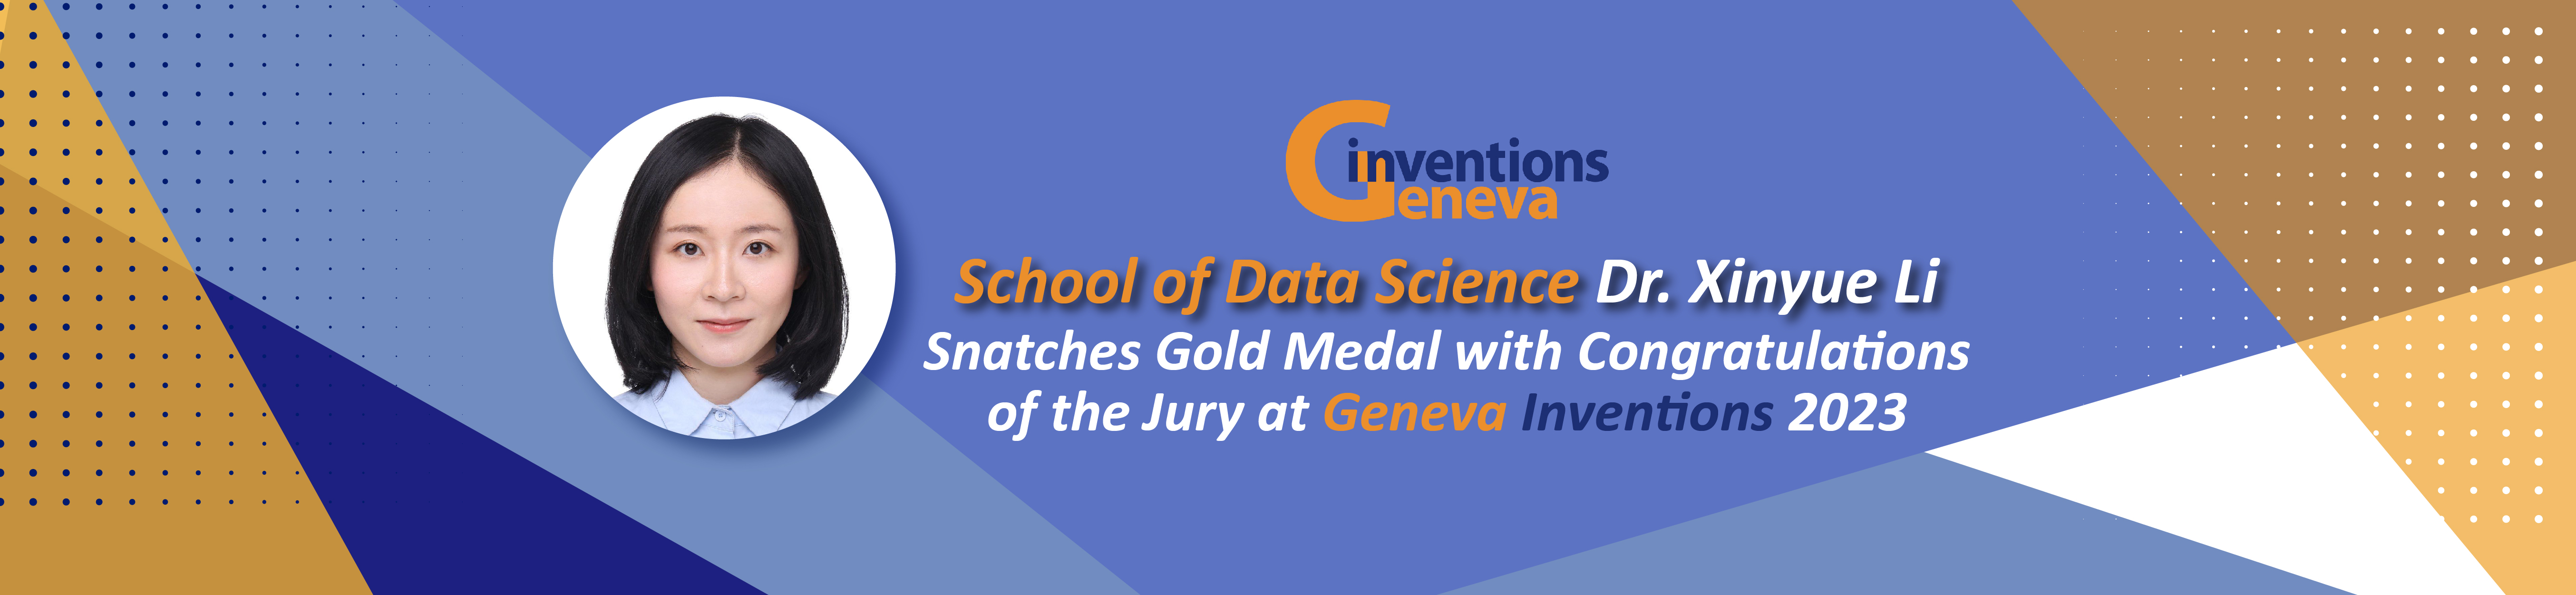 School of Data Science Dr. Xinyue Li Snatches Gold Medal with Congratulations of the Jury at Geneva Inventions 2023